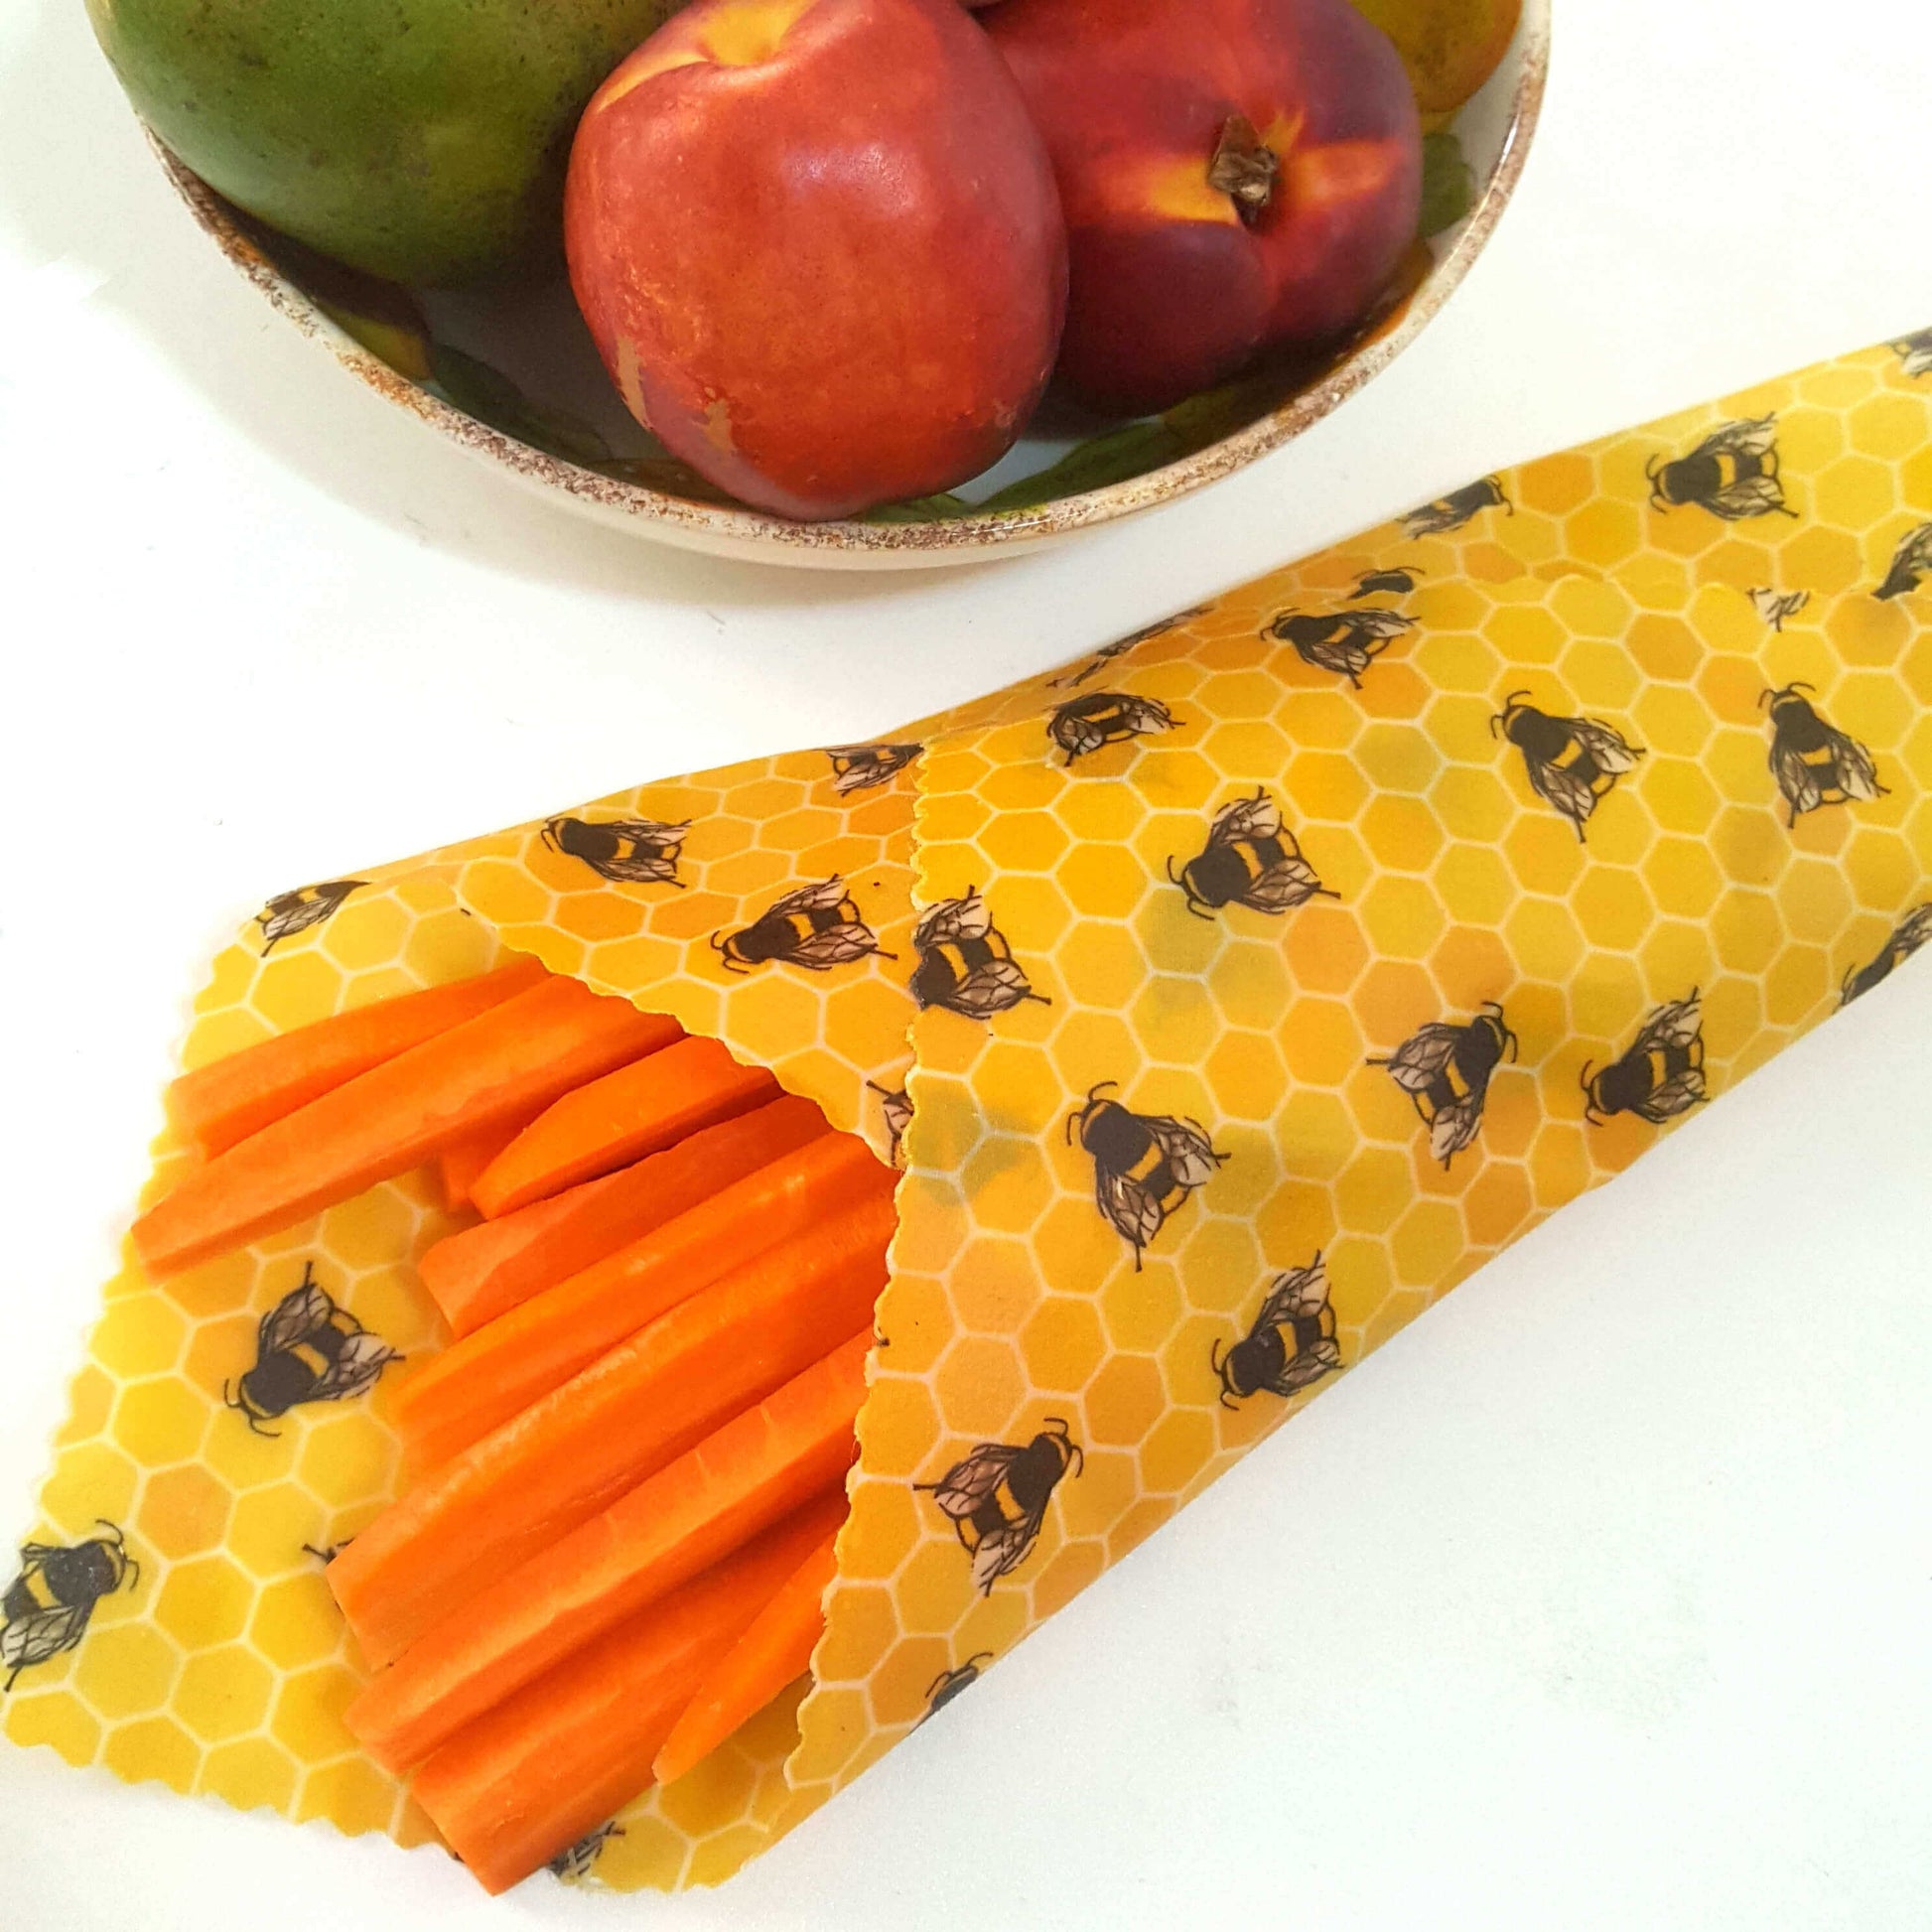 Reusable Beeswax Food Wraps 100% Hand Made in the UK by Honey Bee Good. Planet-Kind single large beeswax wrap in Yellow Bees pattern as flatlay with carrots